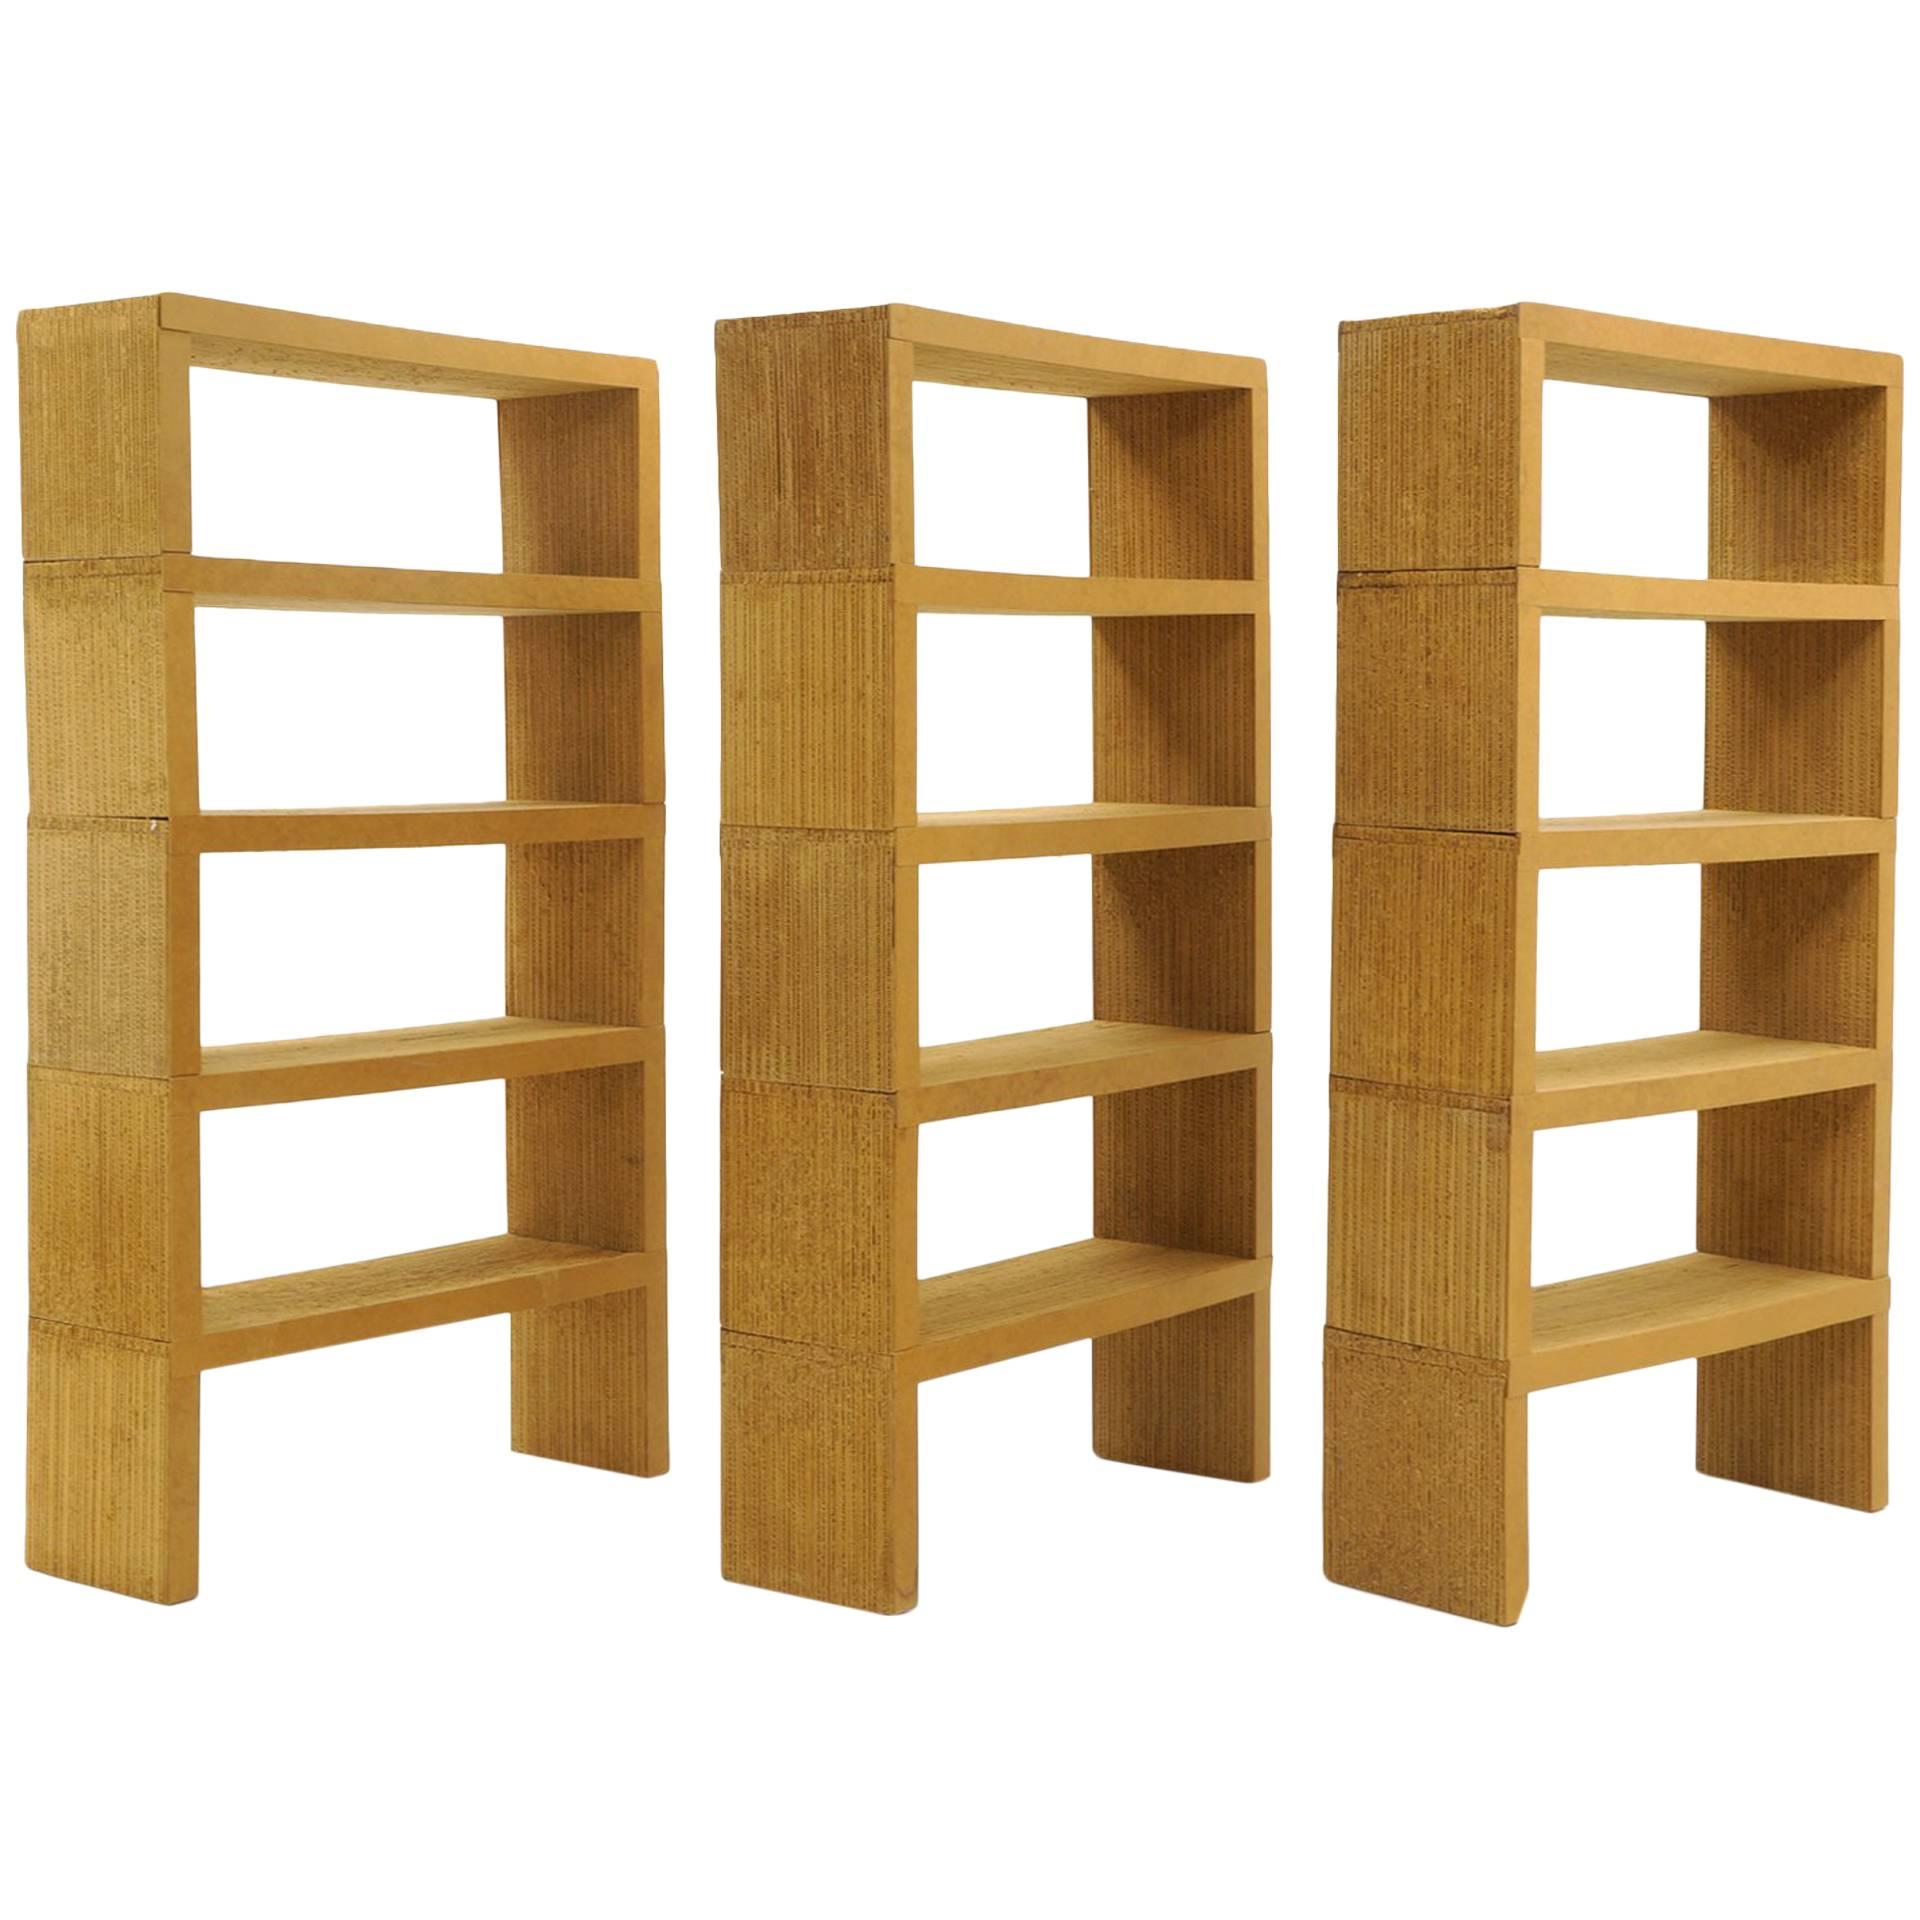 Frank Gehry Easy Edges Bookshelves/Bookcases 15 Pieces Not a Reissue